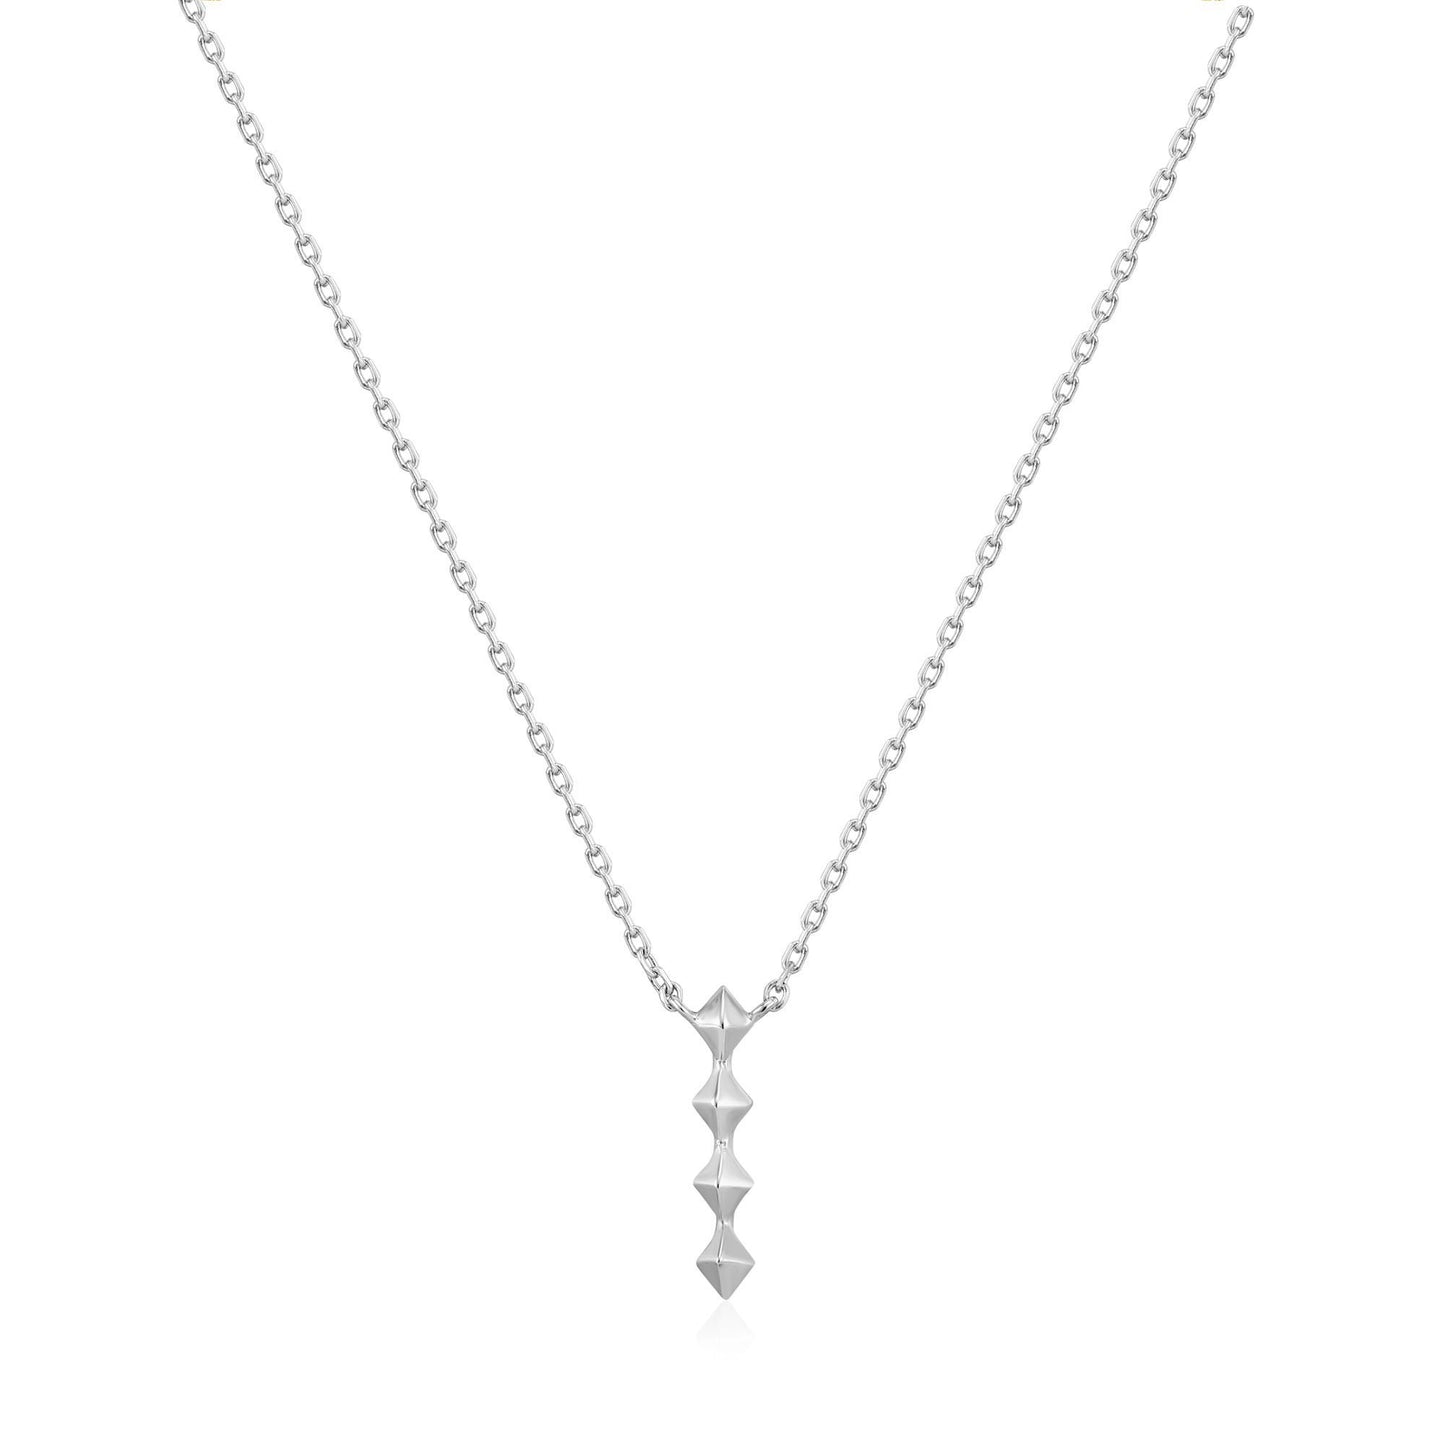 ANIA HAIE ANIA HAIE - Silver Spike Drop Necklace available at The Good Life Boutique